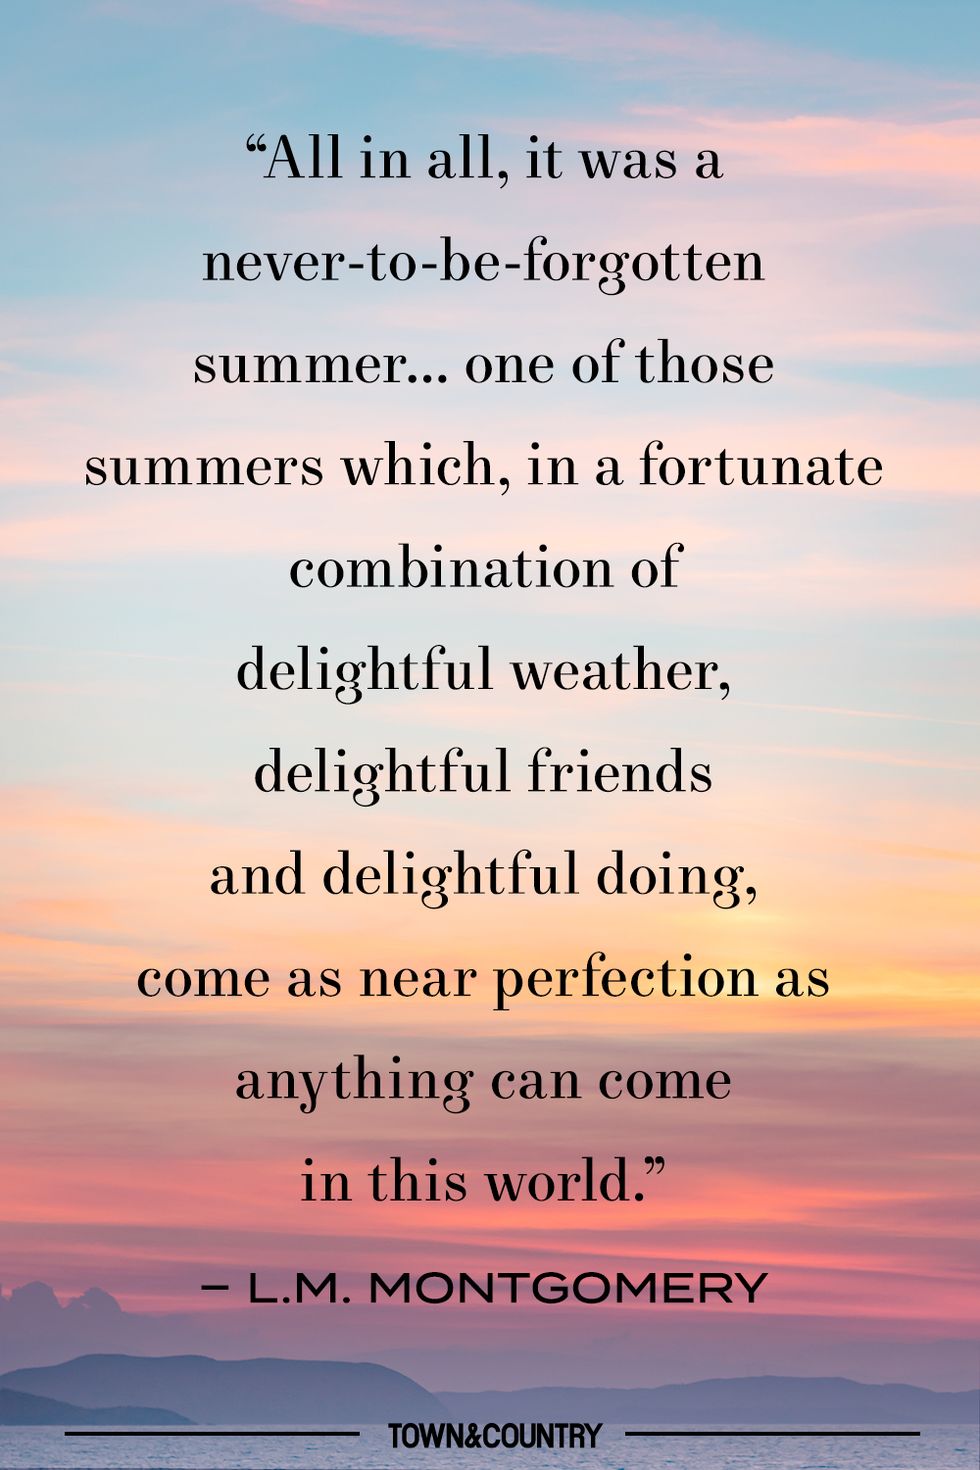 summer quote